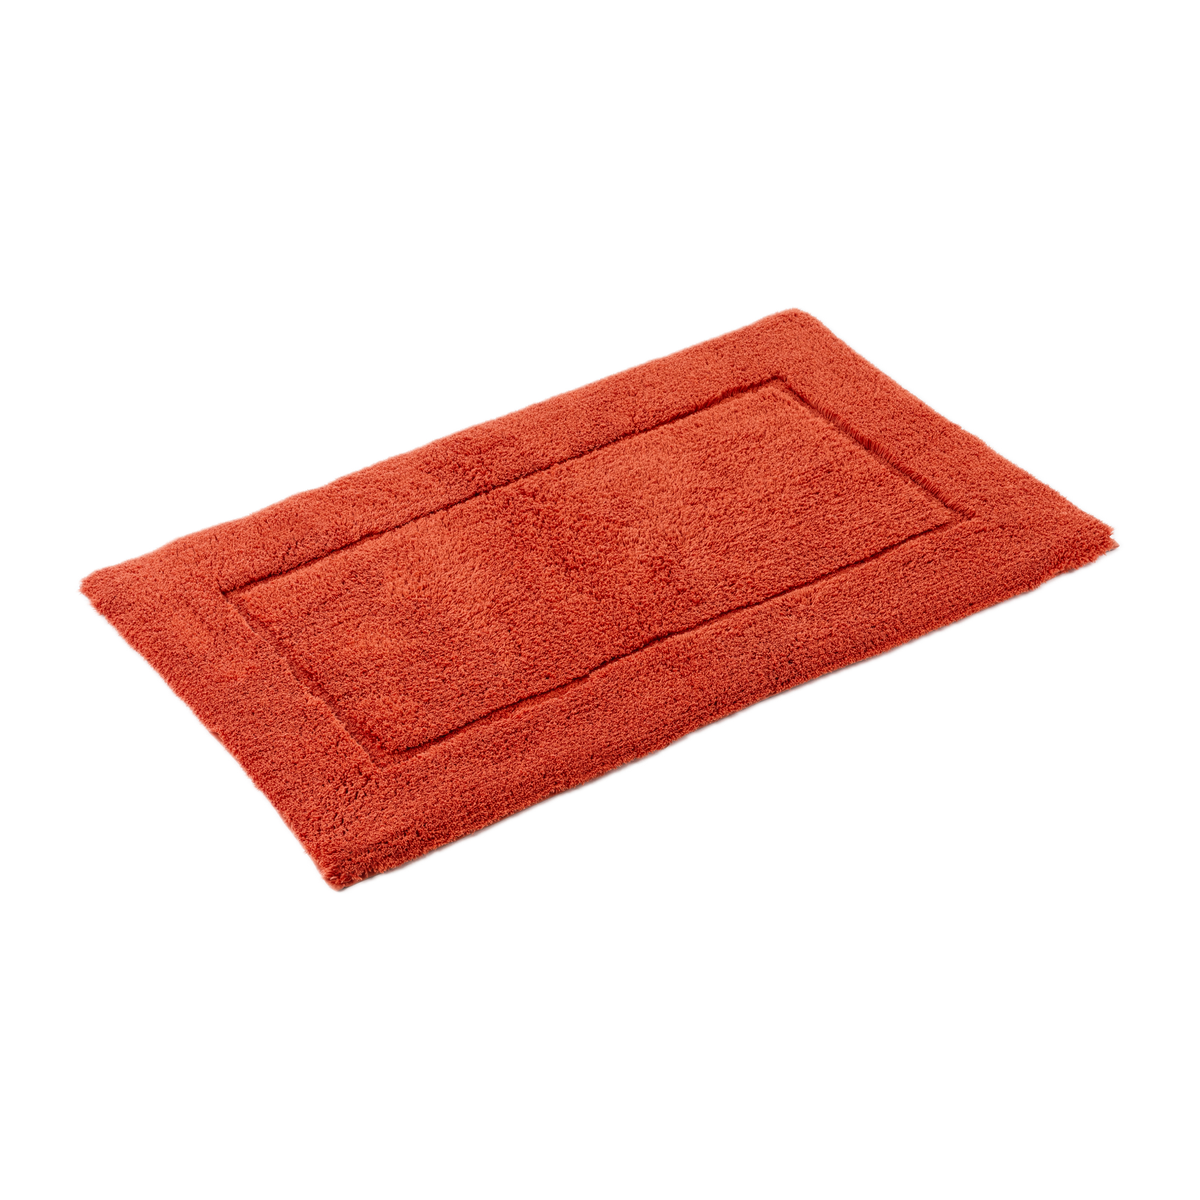 Slanted View of Abyss Habidecor Must Bath Rug in Chili Color